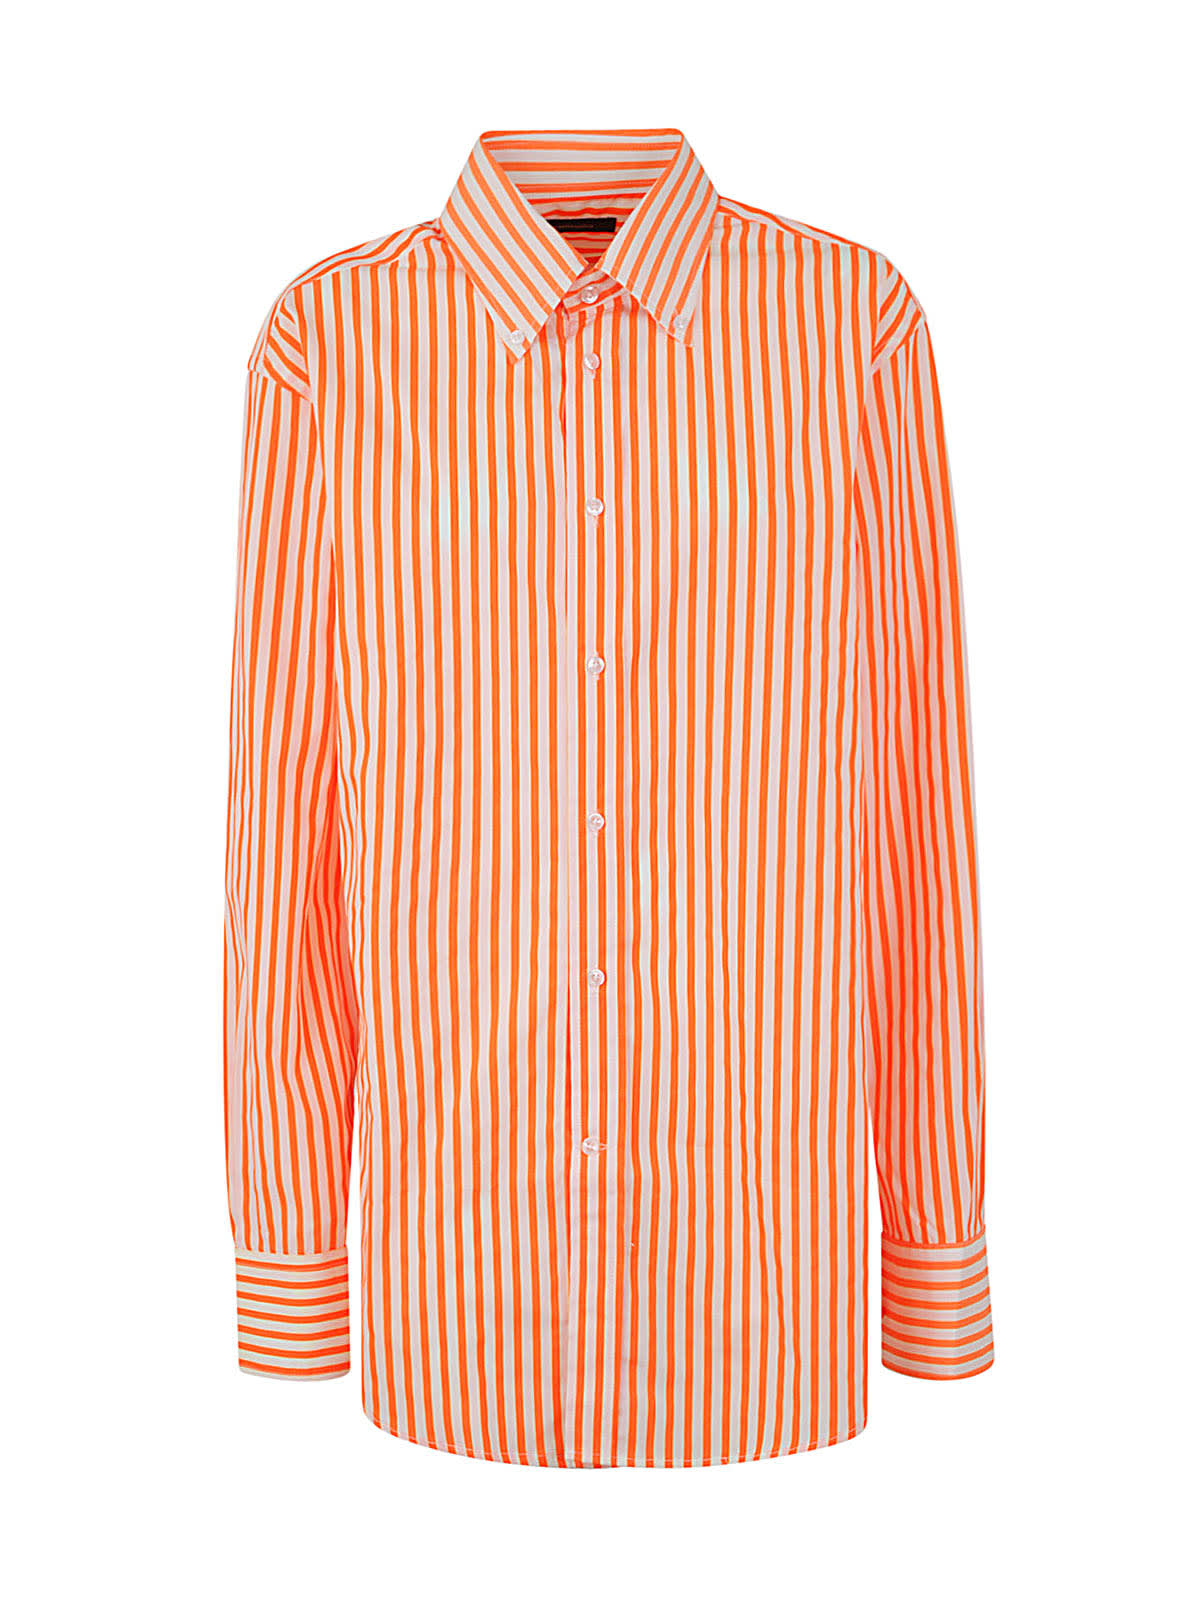 Made in Tomboy Nicky Popeline Striped Shirt